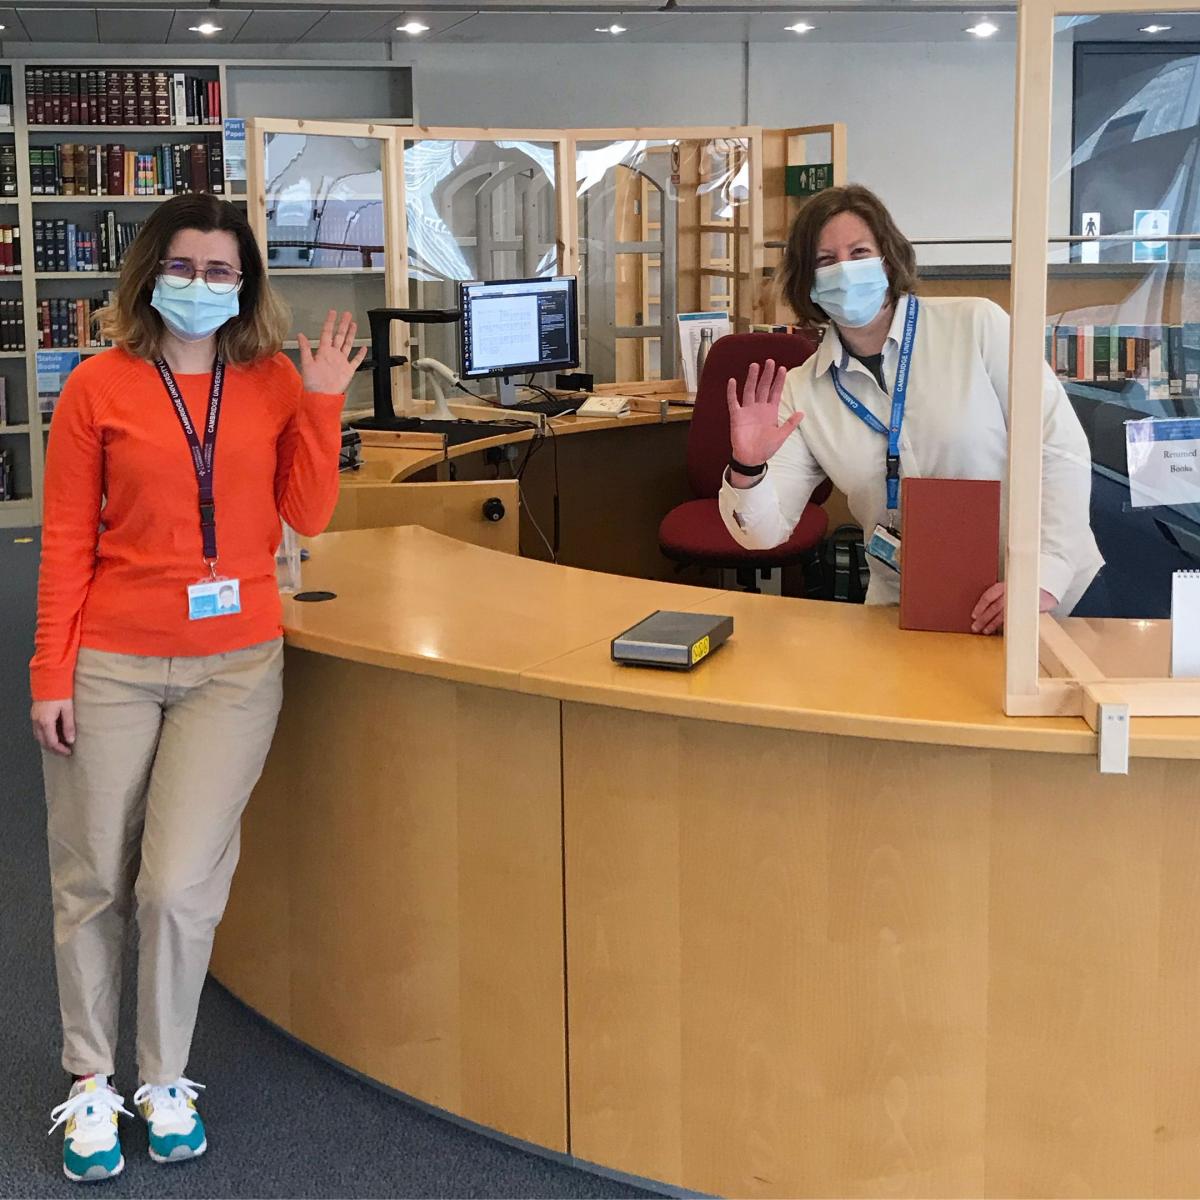 Squire Law Library team members at Enquiry Desk 